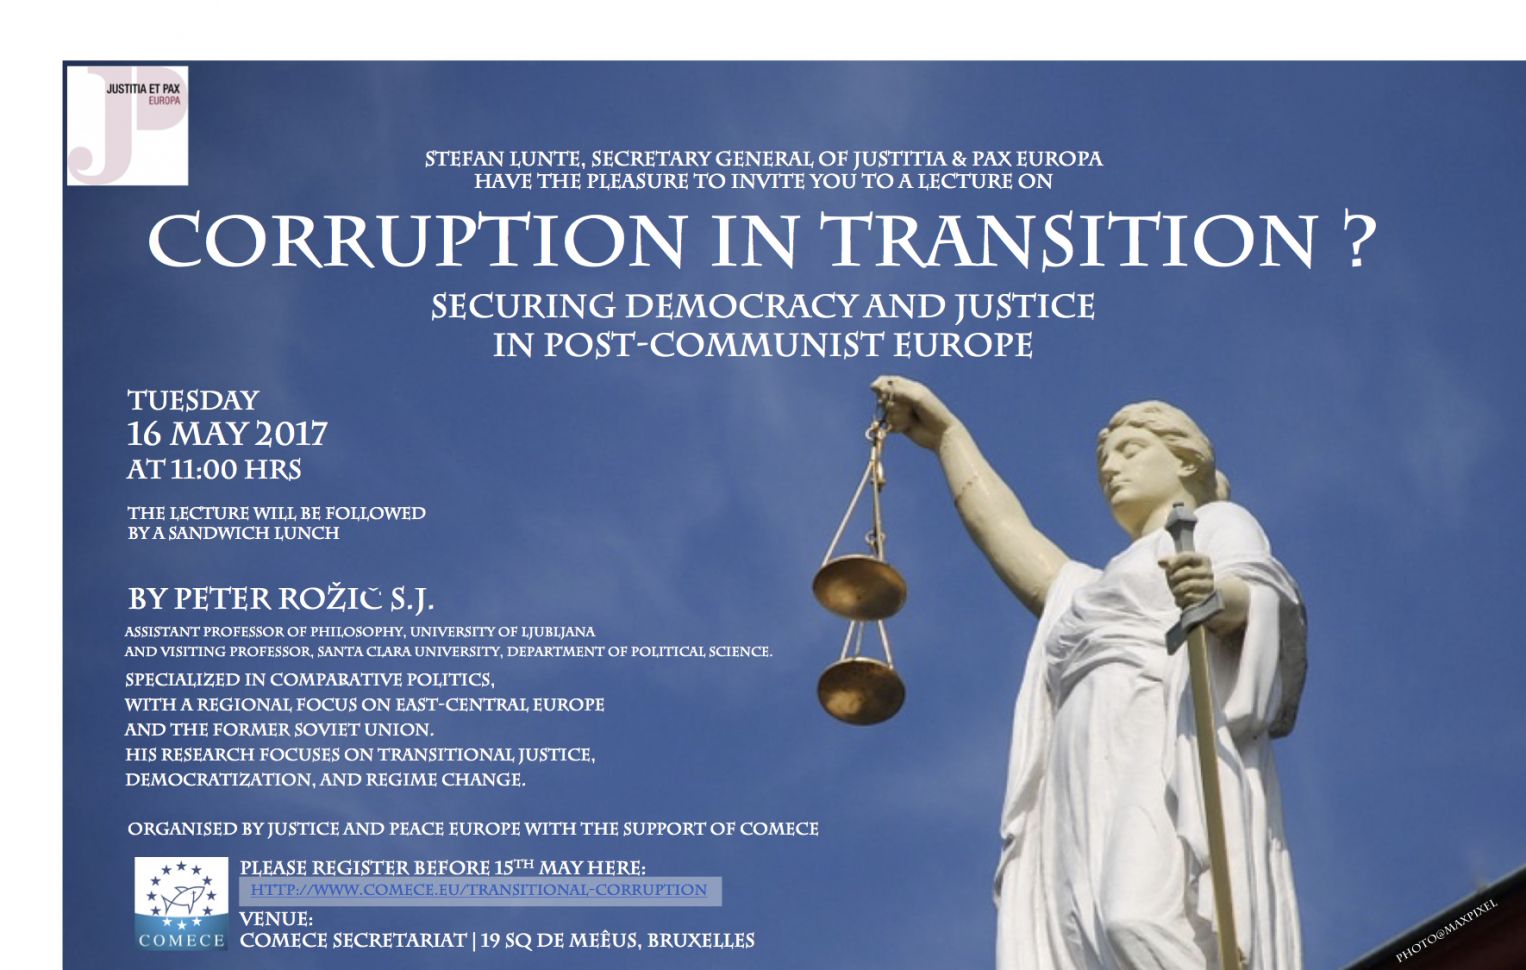 Transitional Corruption? - Securing Democracy and Justice in Post-Communist Europe